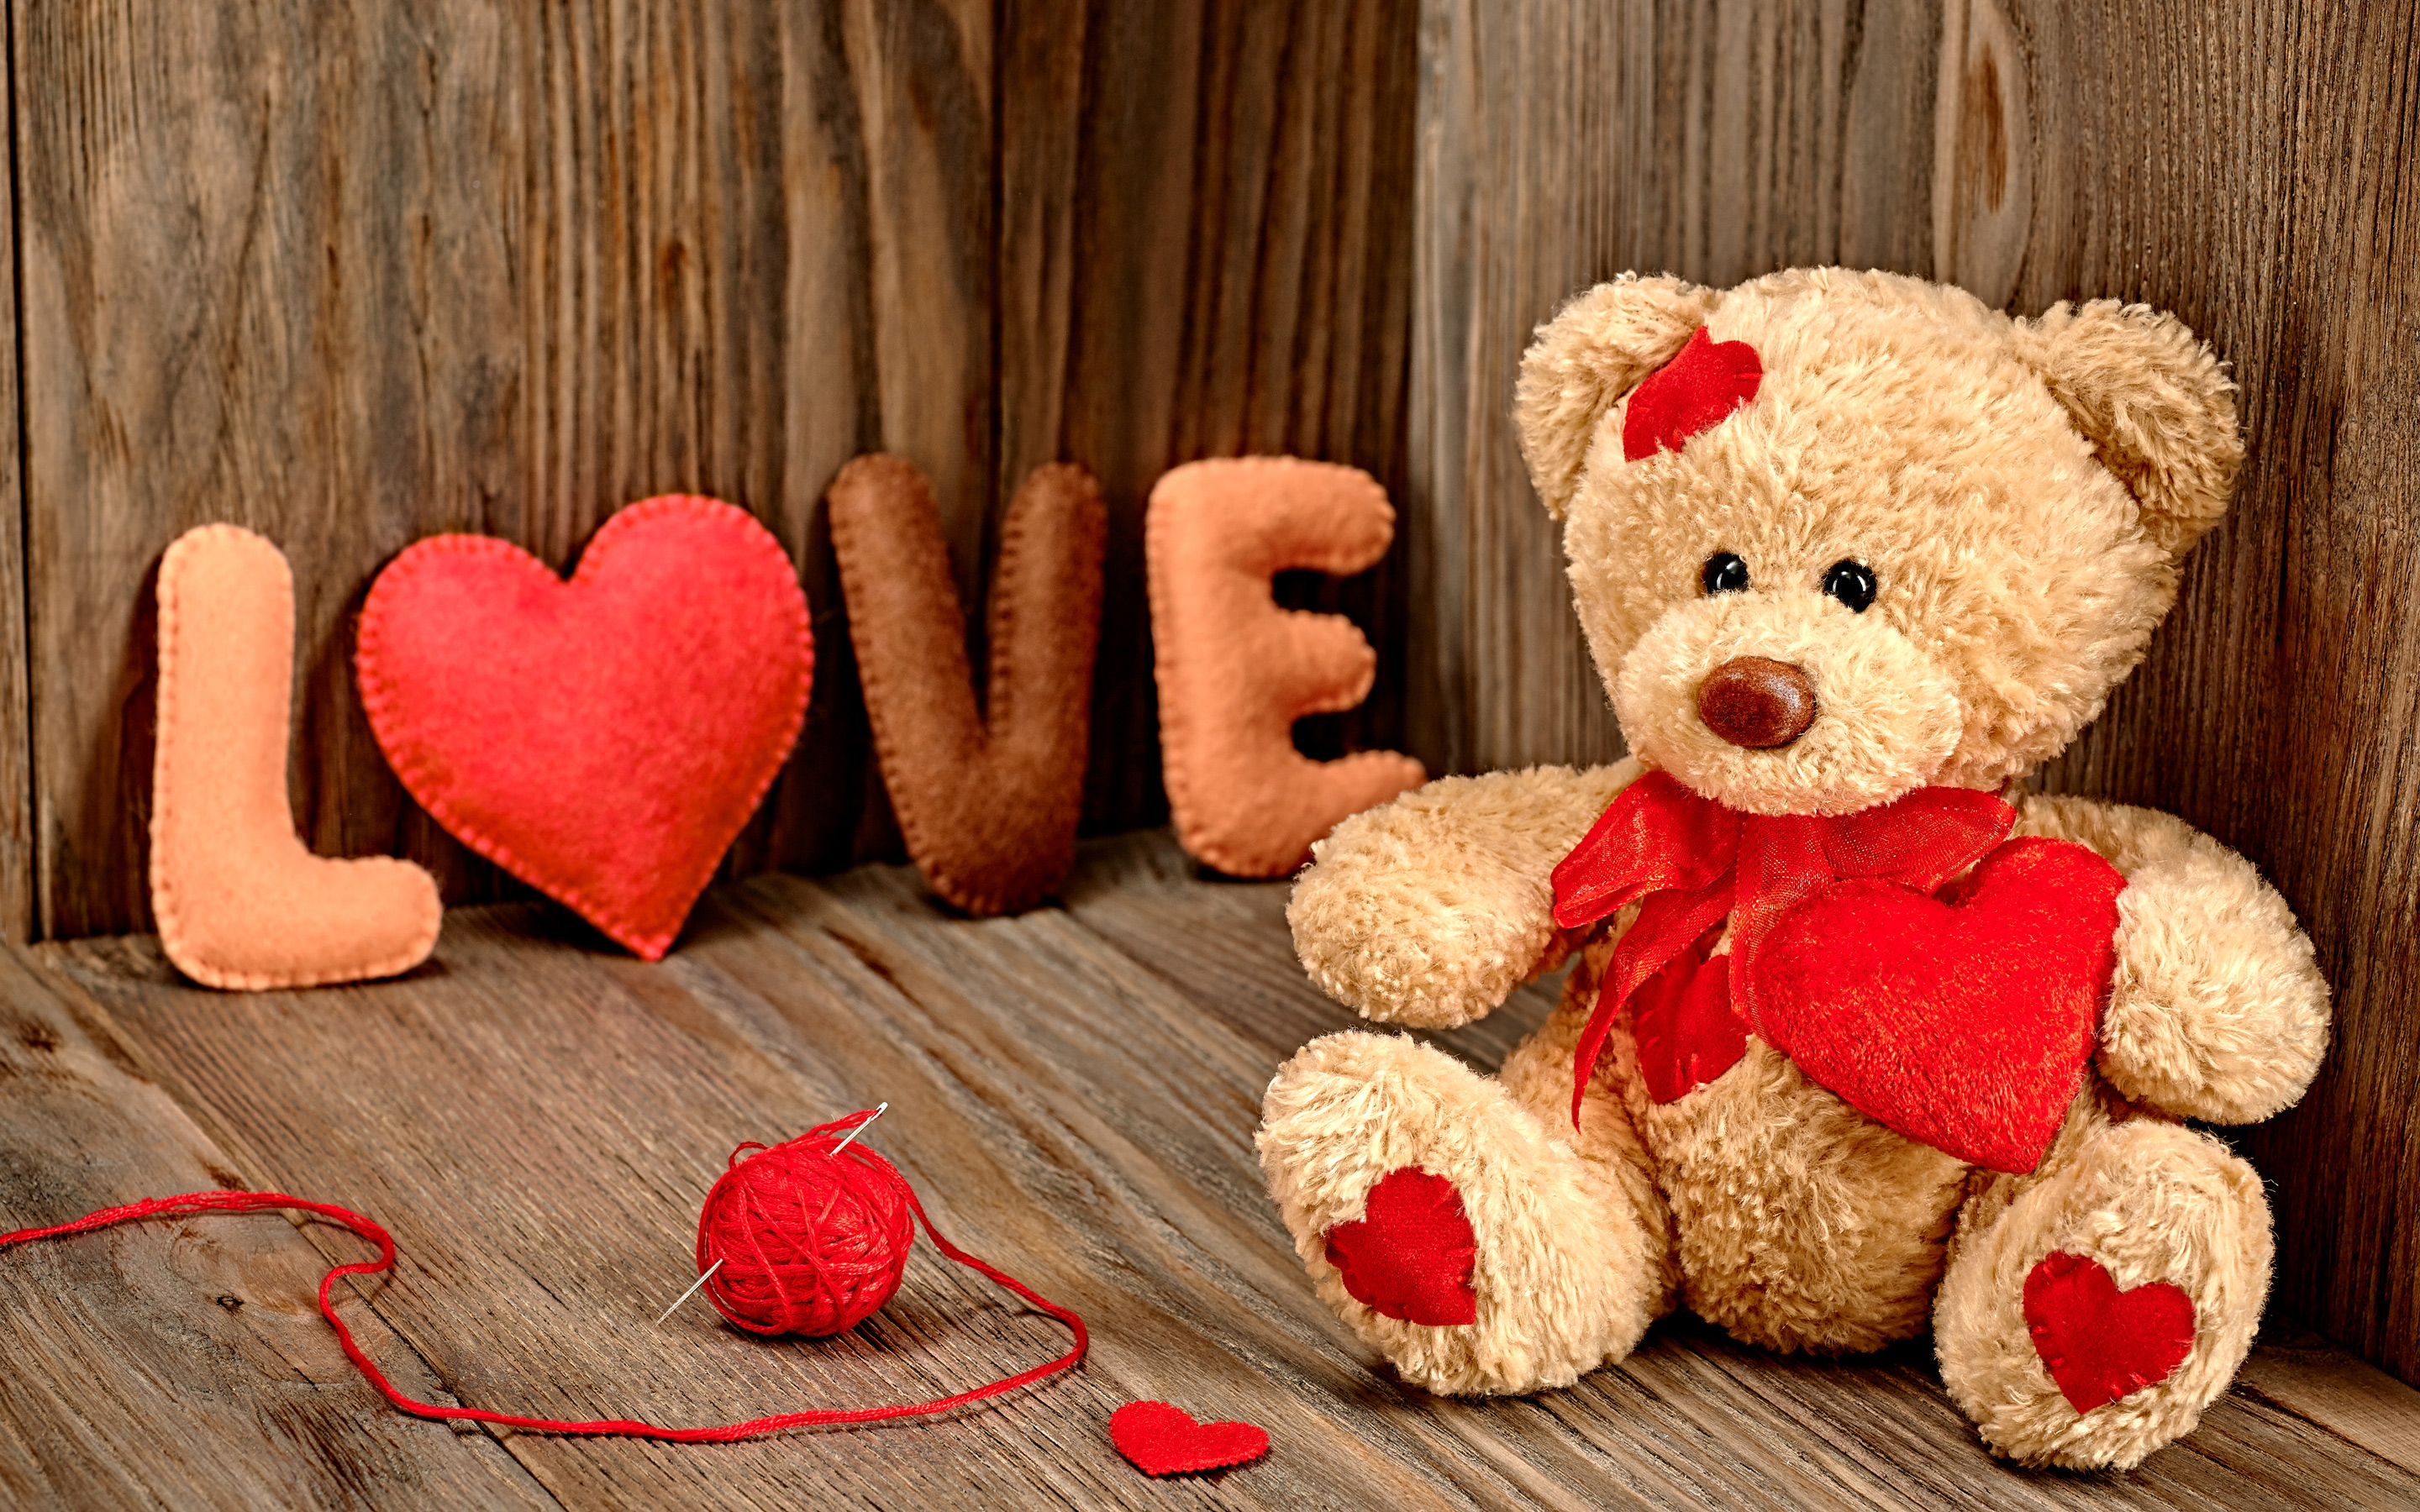 Cute and Romantic Wallpaper with Teddy Bear Picture | HD ...